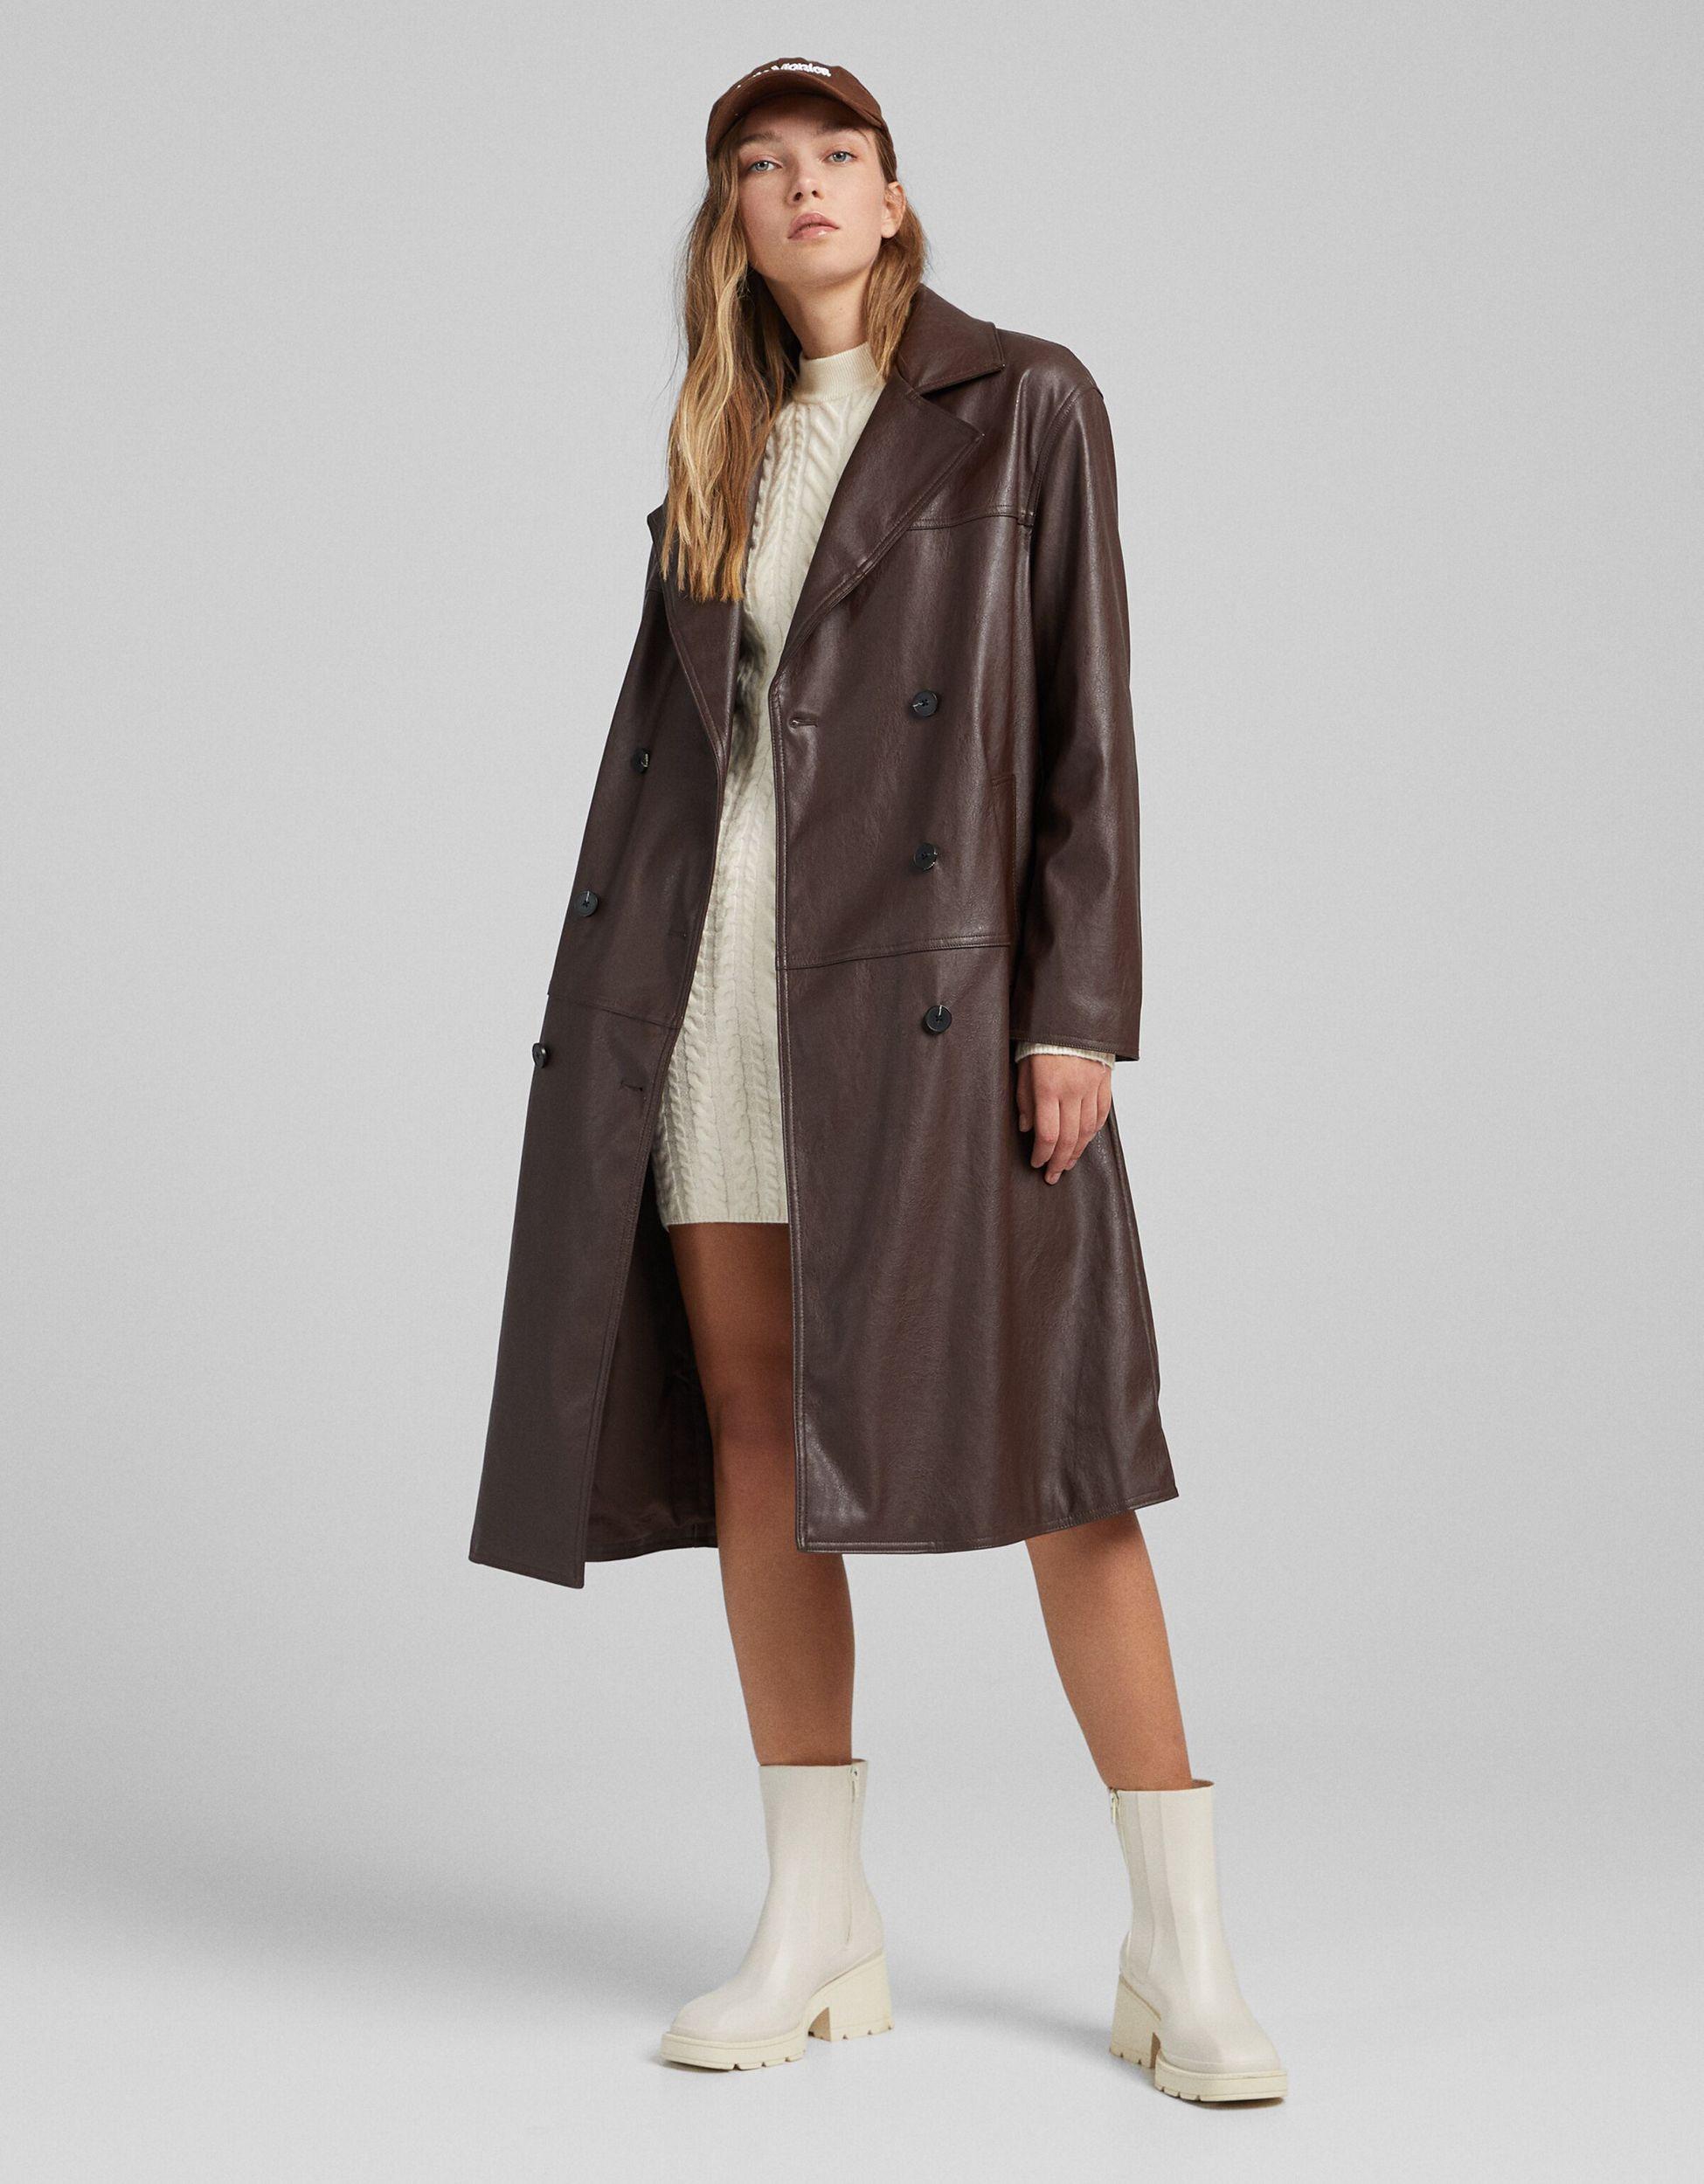 Bershka Synthetic Faux Leather Trench Coat in Brown | Lyst Canada